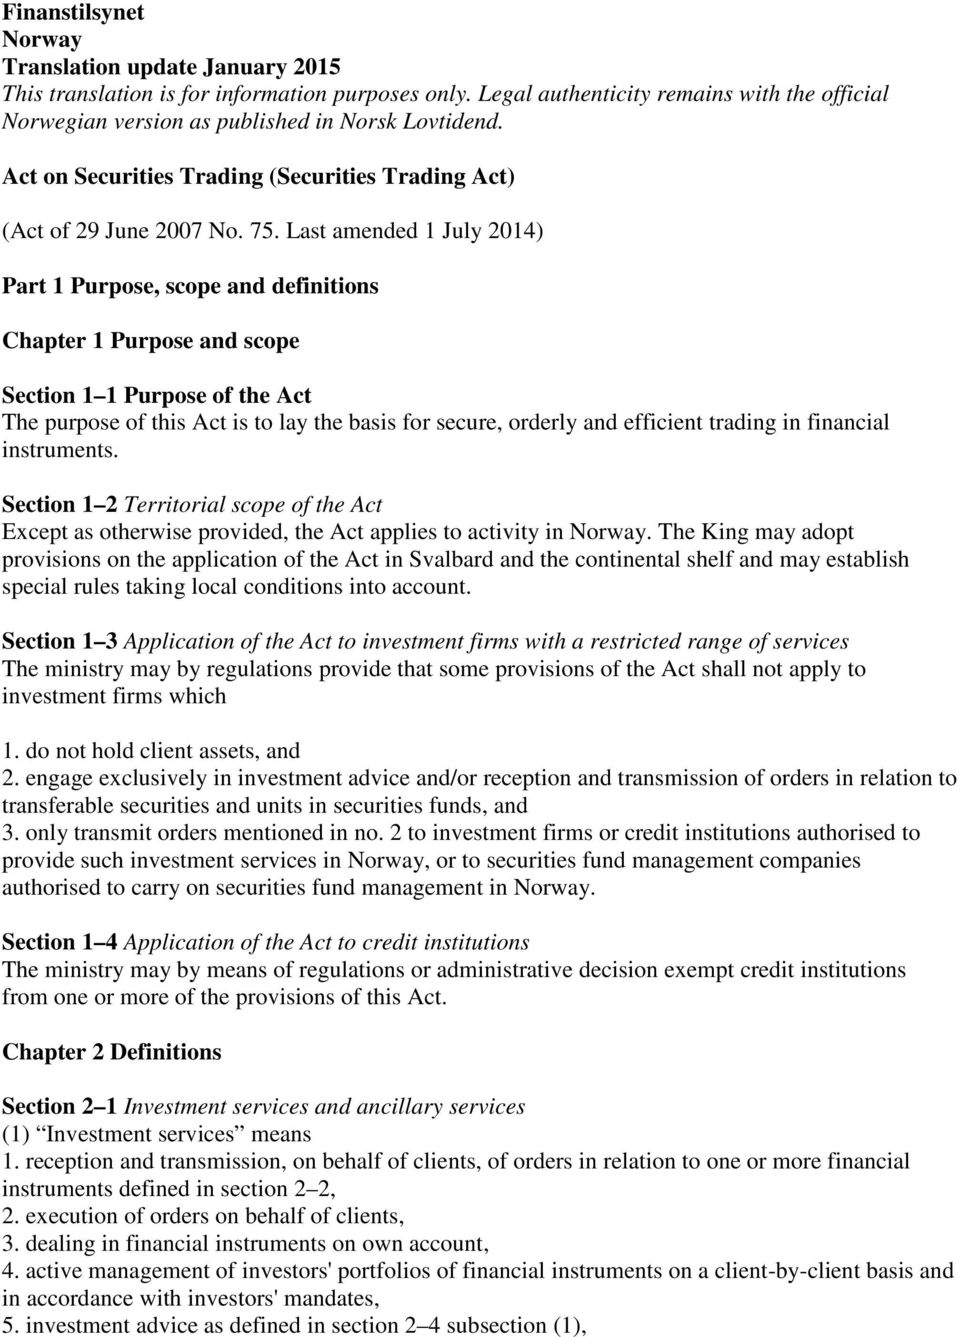 Last amended 1 July 2014) Part 1 Purpose, scope and definitions Chapter 1 Purpose and scope Section 1 1 Purpose of the Act The purpose of this Act is to lay the basis for secure, orderly and